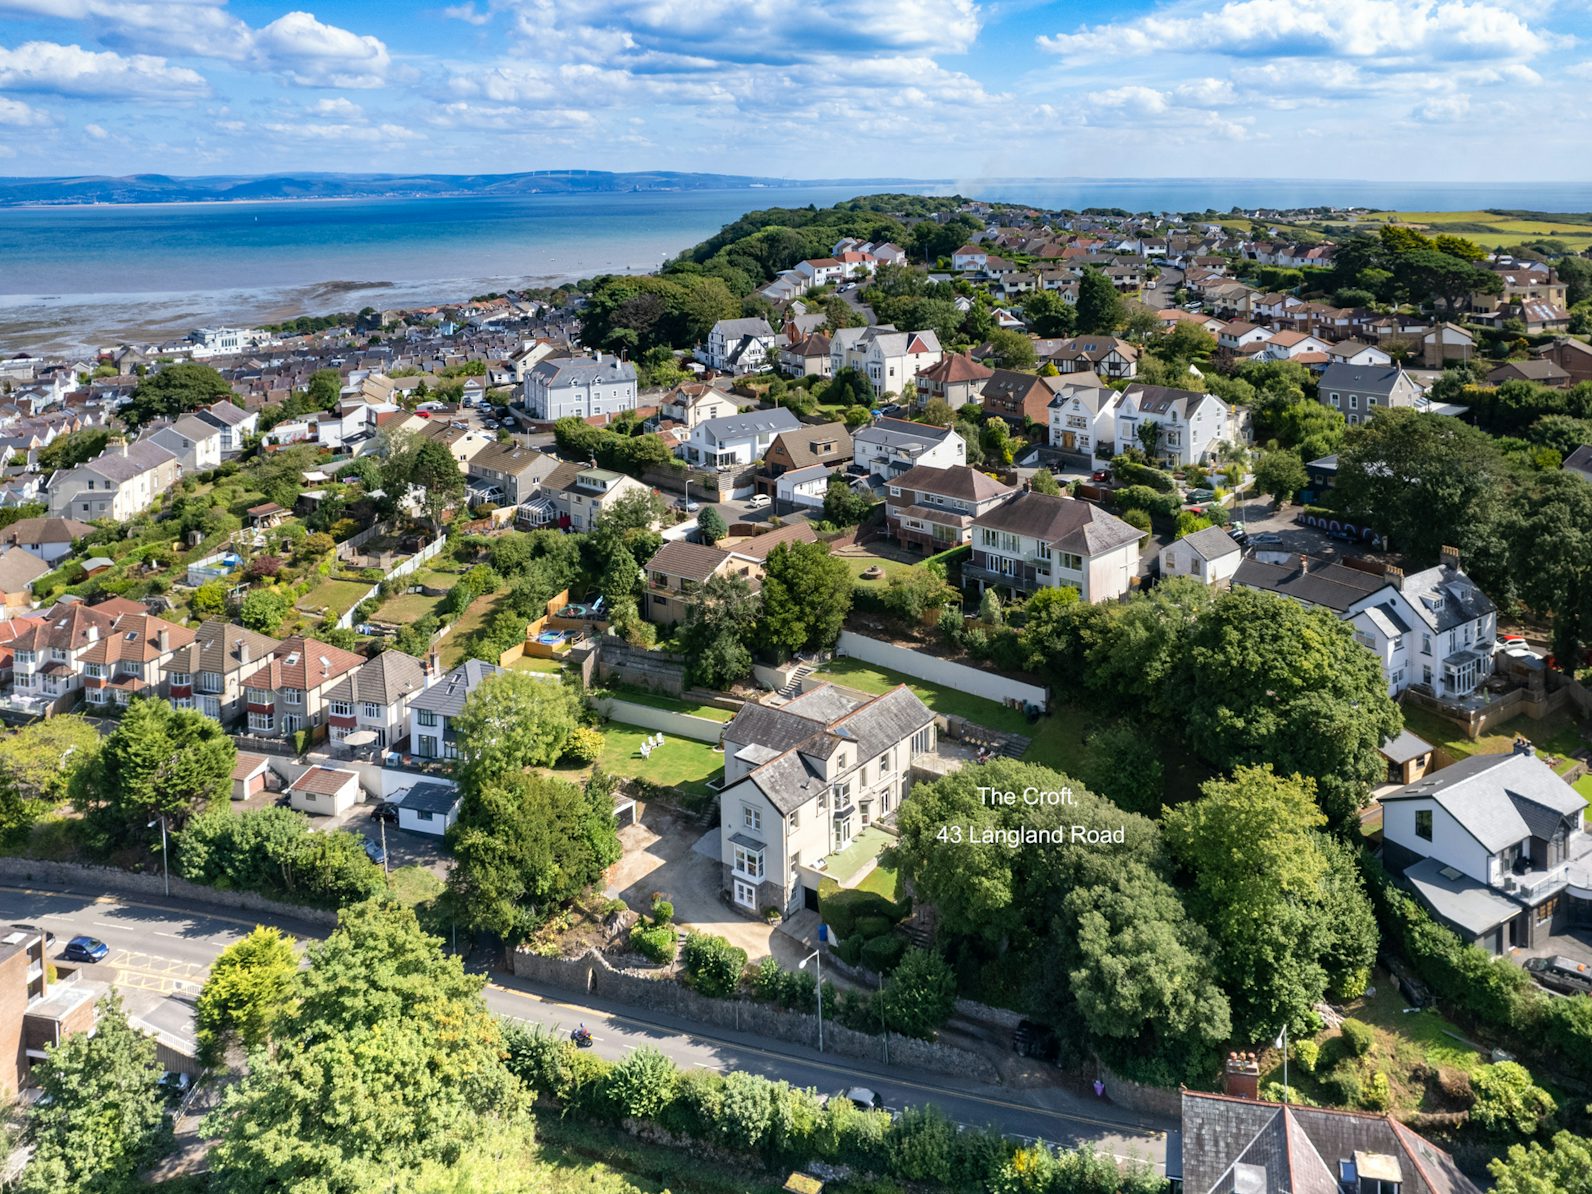 Detached House for sale on Langland Road Mumbles, Swansea, SA3